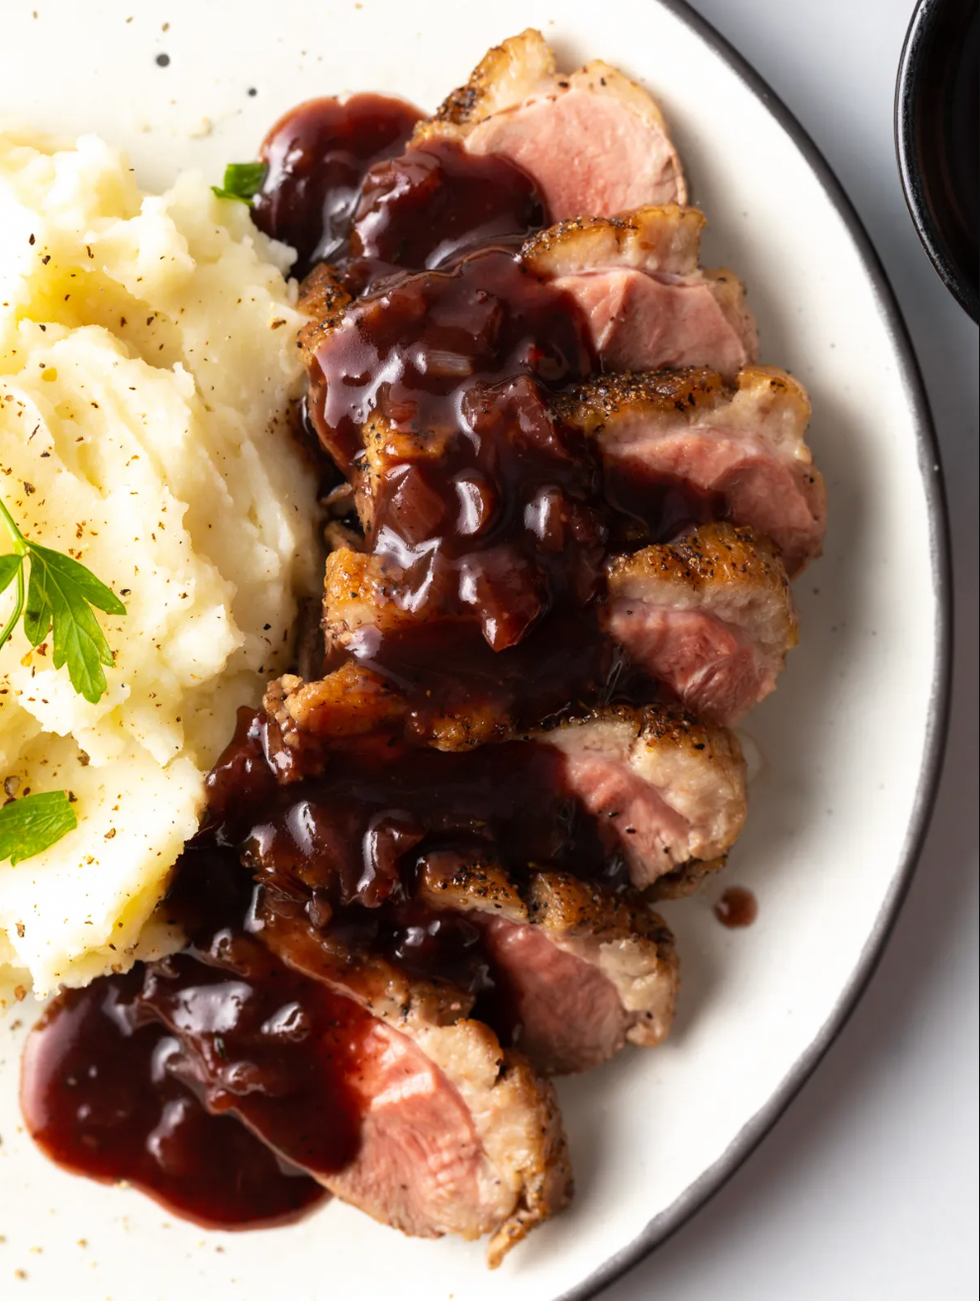 Pan Seared Duck Breast with Savory Blackberry Sauce